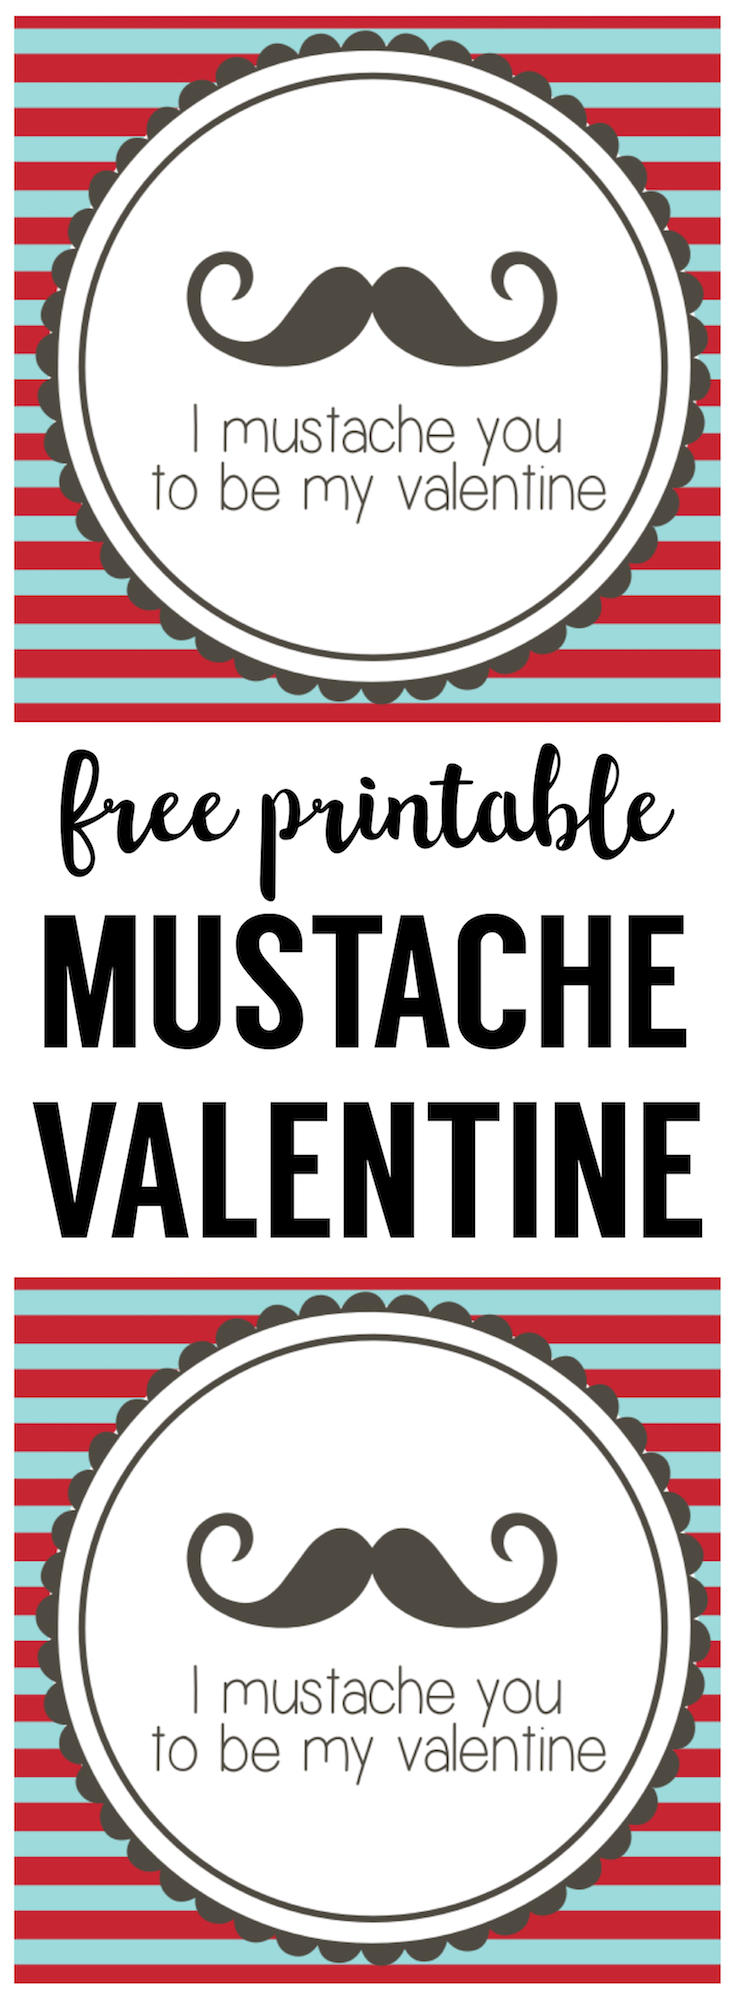 Free Printable Mustache Valentines. These free printable mustache valentine cards are a fun valentine even for older kids valentines. Just print and add a fake mustache to the card.